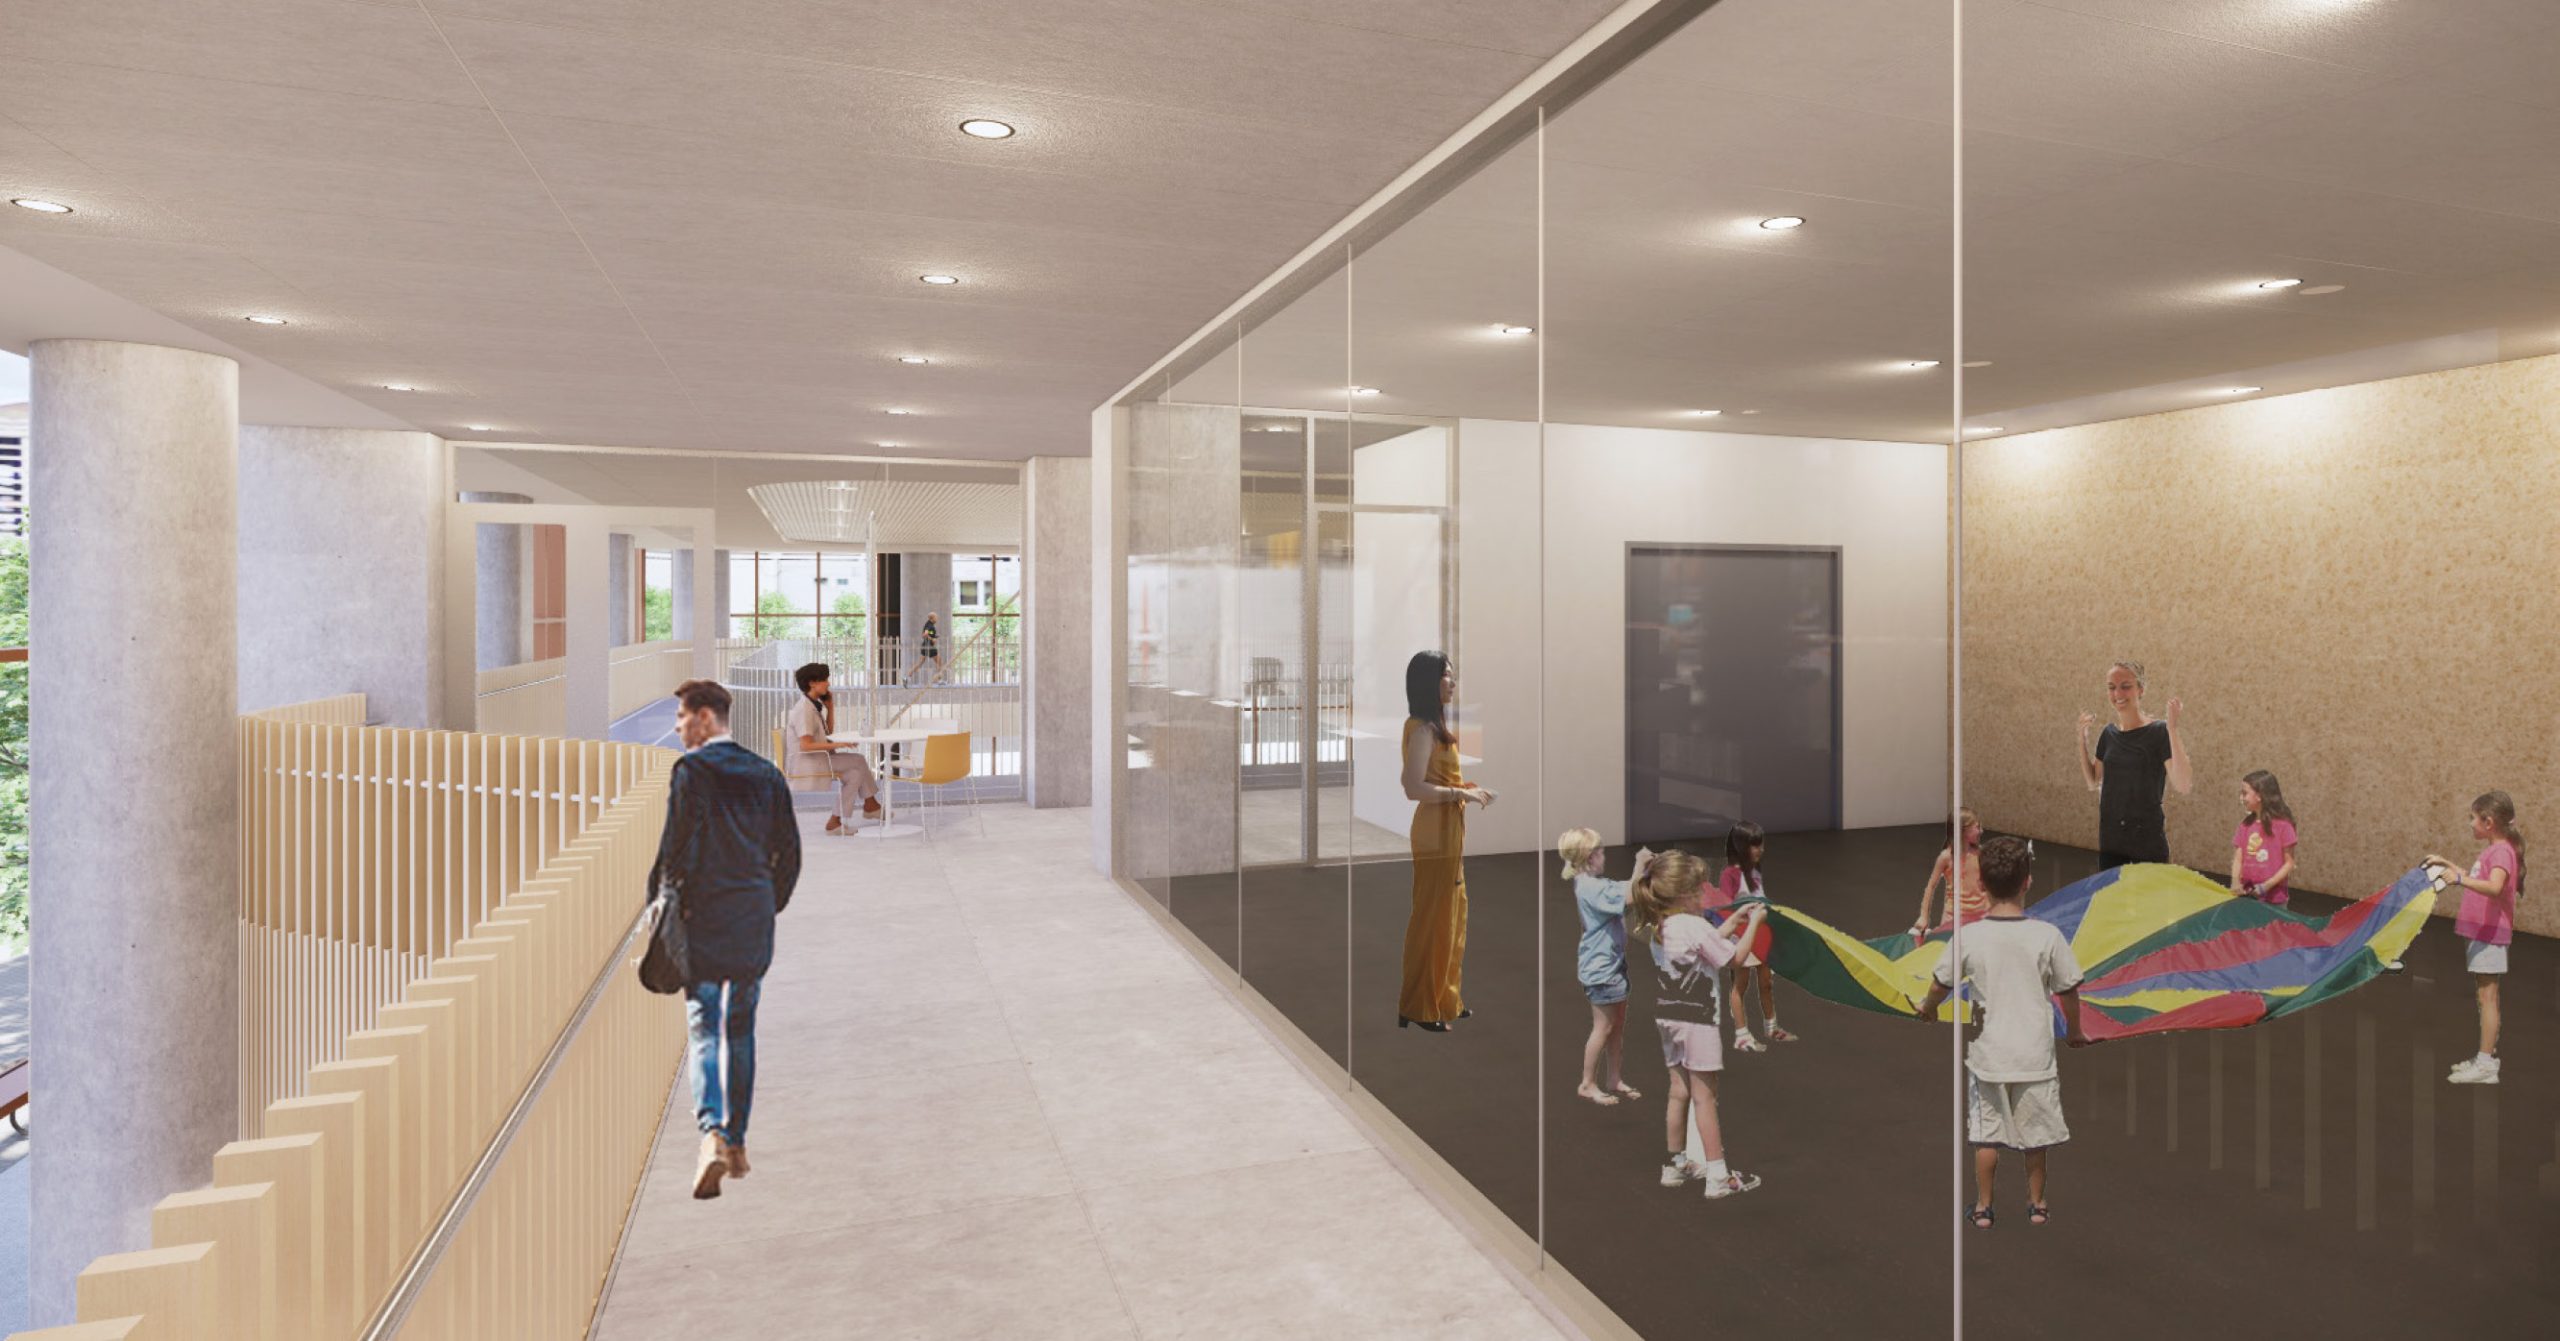 An illustration of the community recreation centre multi-purpose room, which shows children playing with a parachute through the glass wall of the room. The second floor hallway runs parallel to the multi-purpose room and has a ledge that looks down to the first floor.